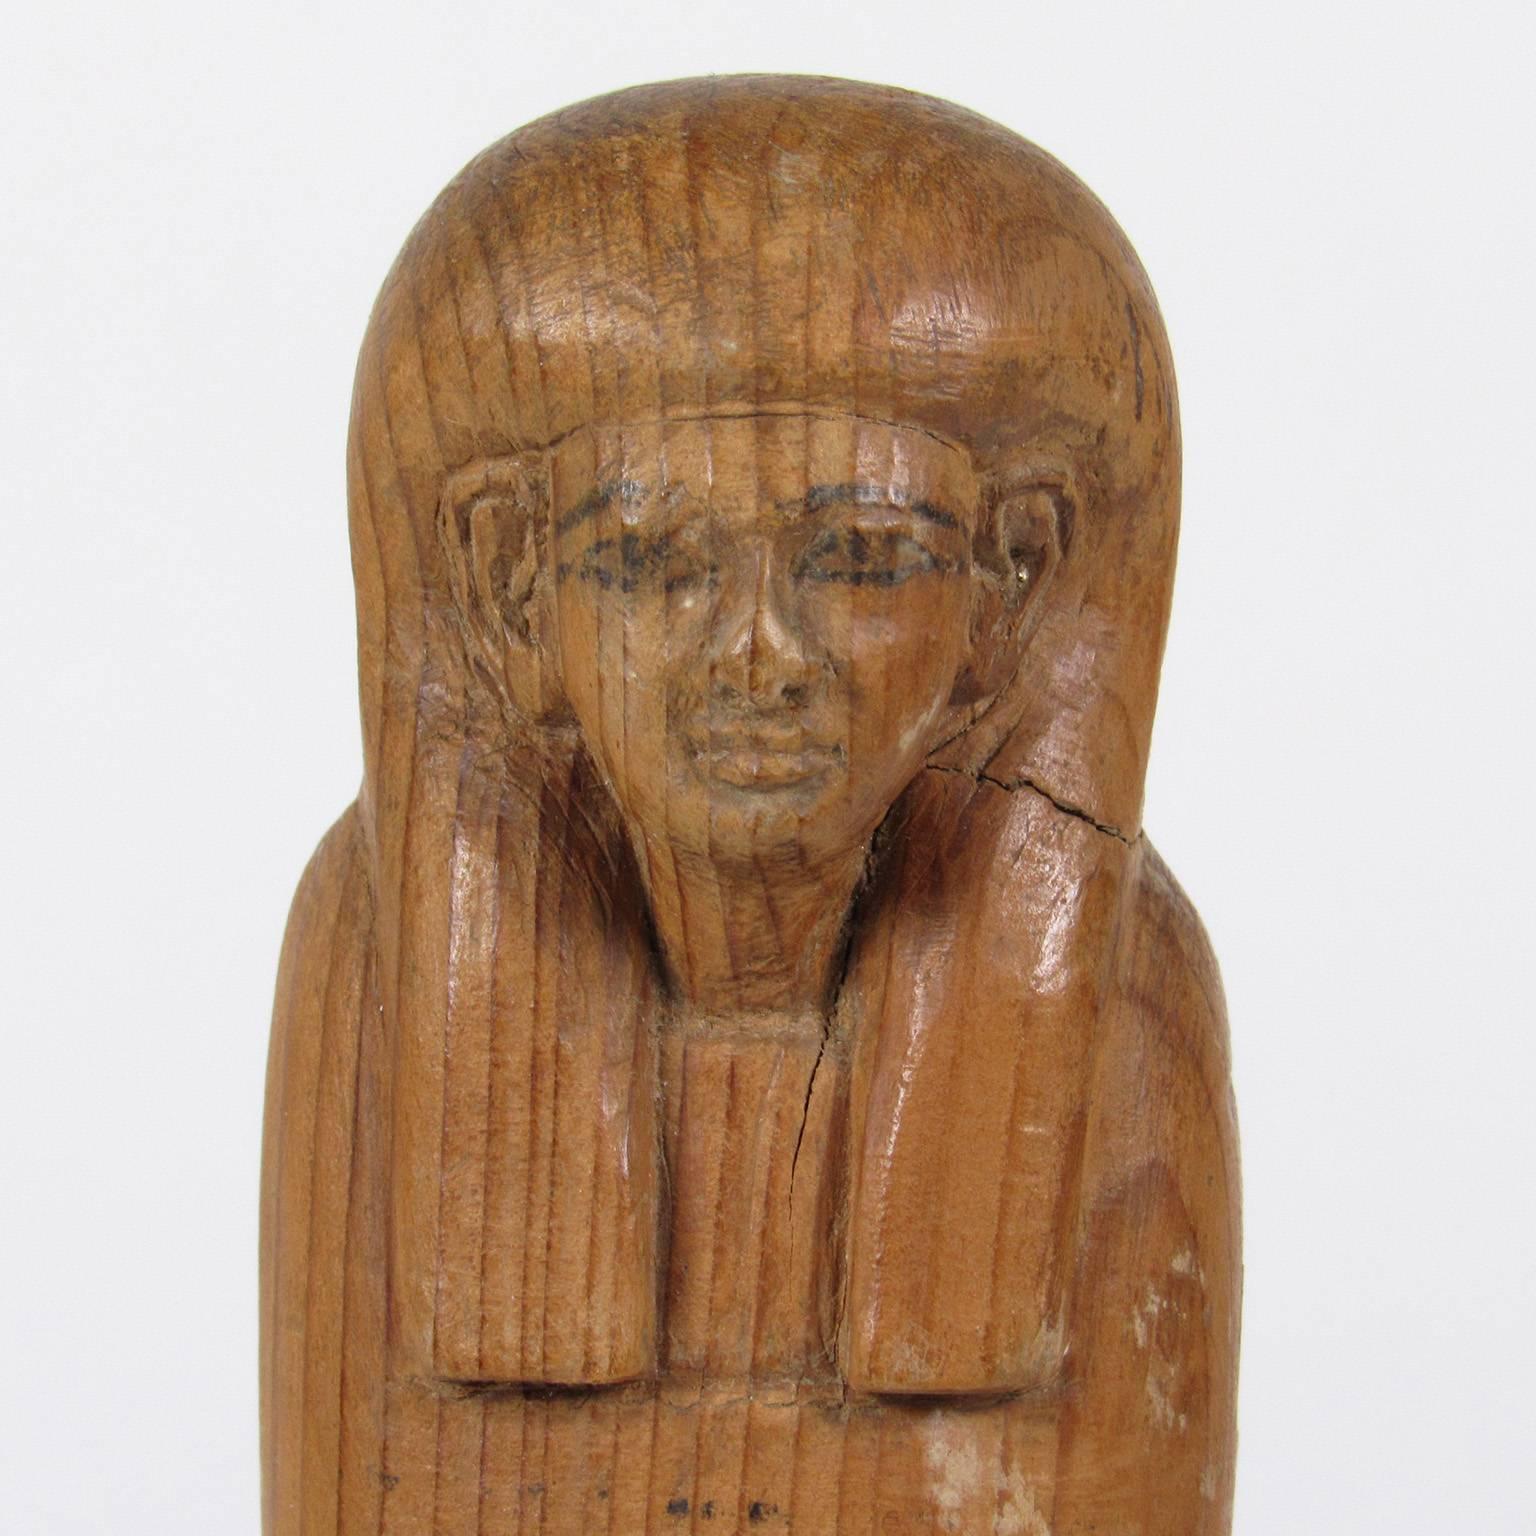 Ancient Egyptian carved wood Ushabti figure, with painted eyes mounted on a black acrylic base
measure: Height 8 inches, overall 9 x 2 7/8 x 2 inches. Purchased from Royal-Athena Galleries in NYC. Original receipt available to buyer.